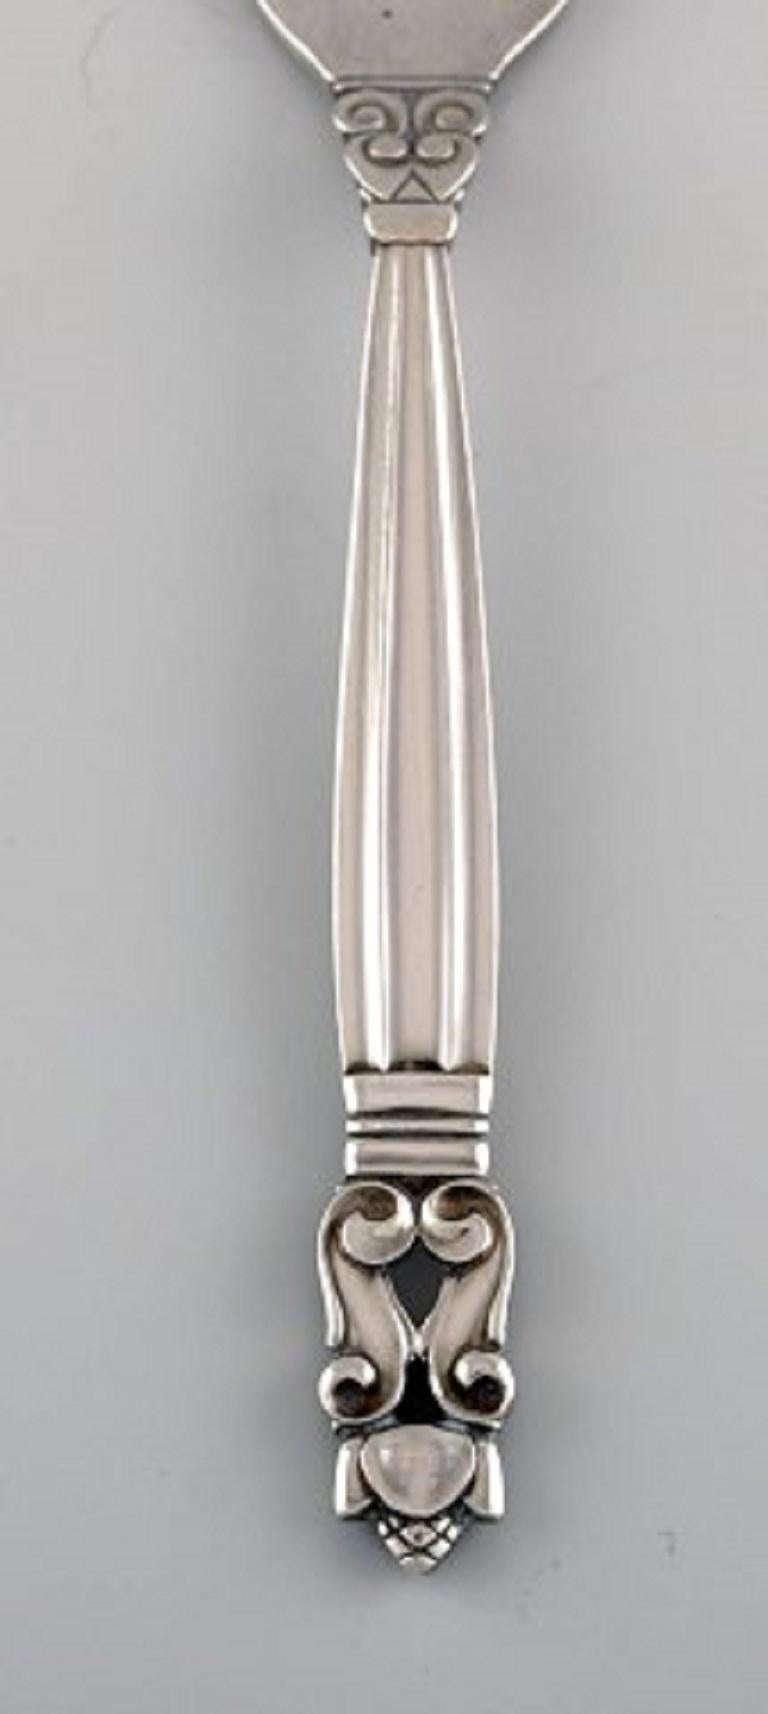 Georg Jensen Acorn fish fork in sterling silver. 8 pieces in stock.
Measure: Length 16.5 cm.
In very good condition.
Stamped.